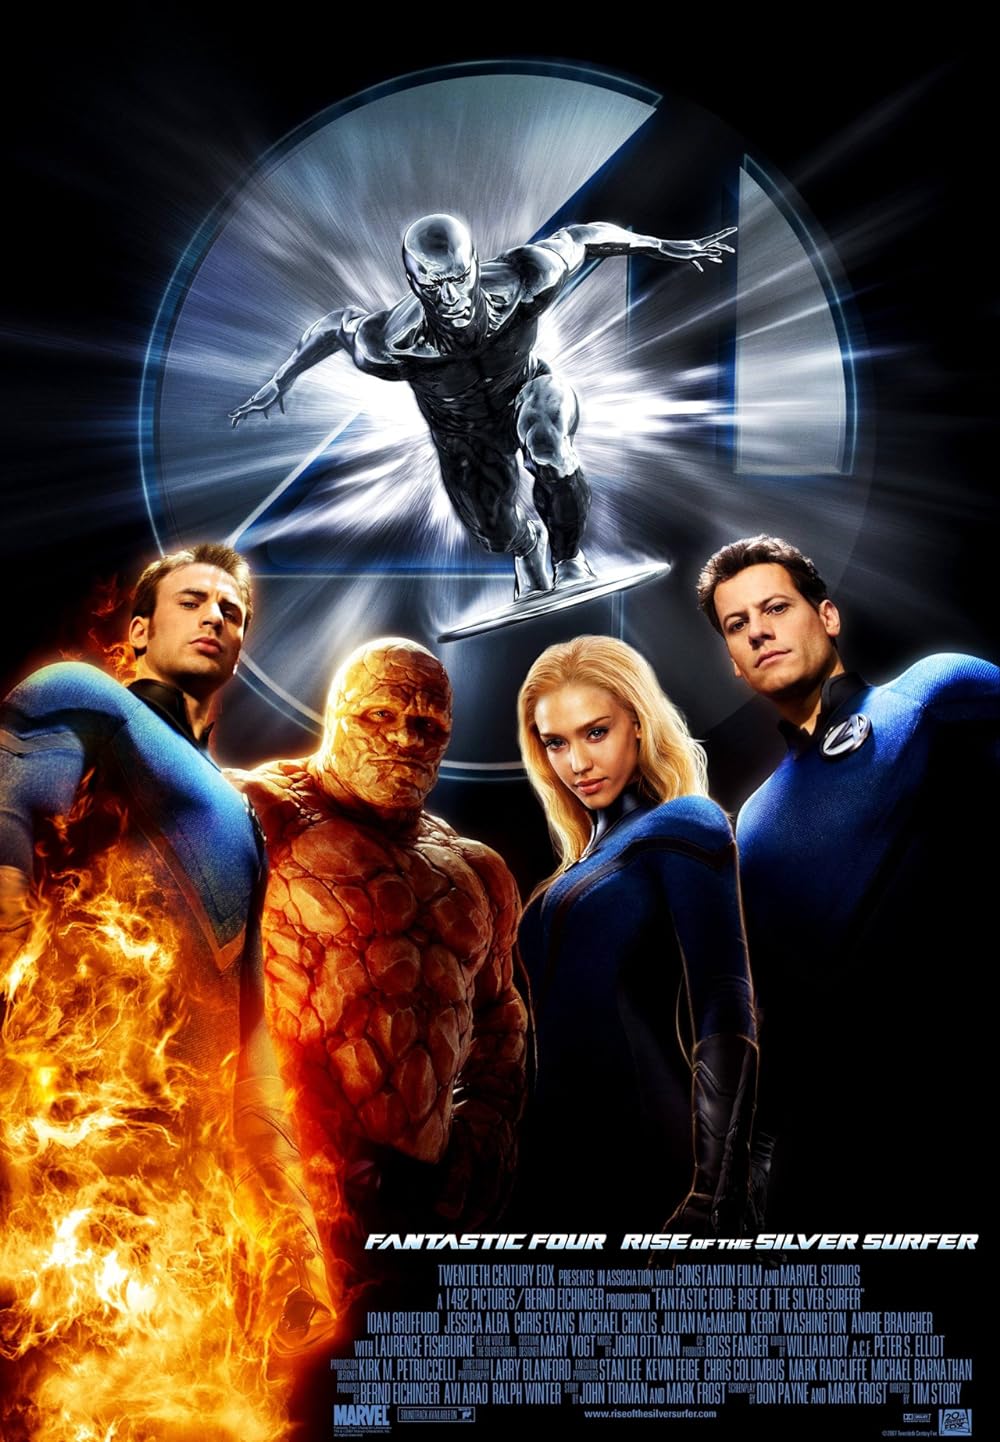 Fantastic Four: Rise of the Silver Surfer (2007) 448Kbps 23.976Fps 48Khz 5.1Ch BluRay Turkish Audio TAC